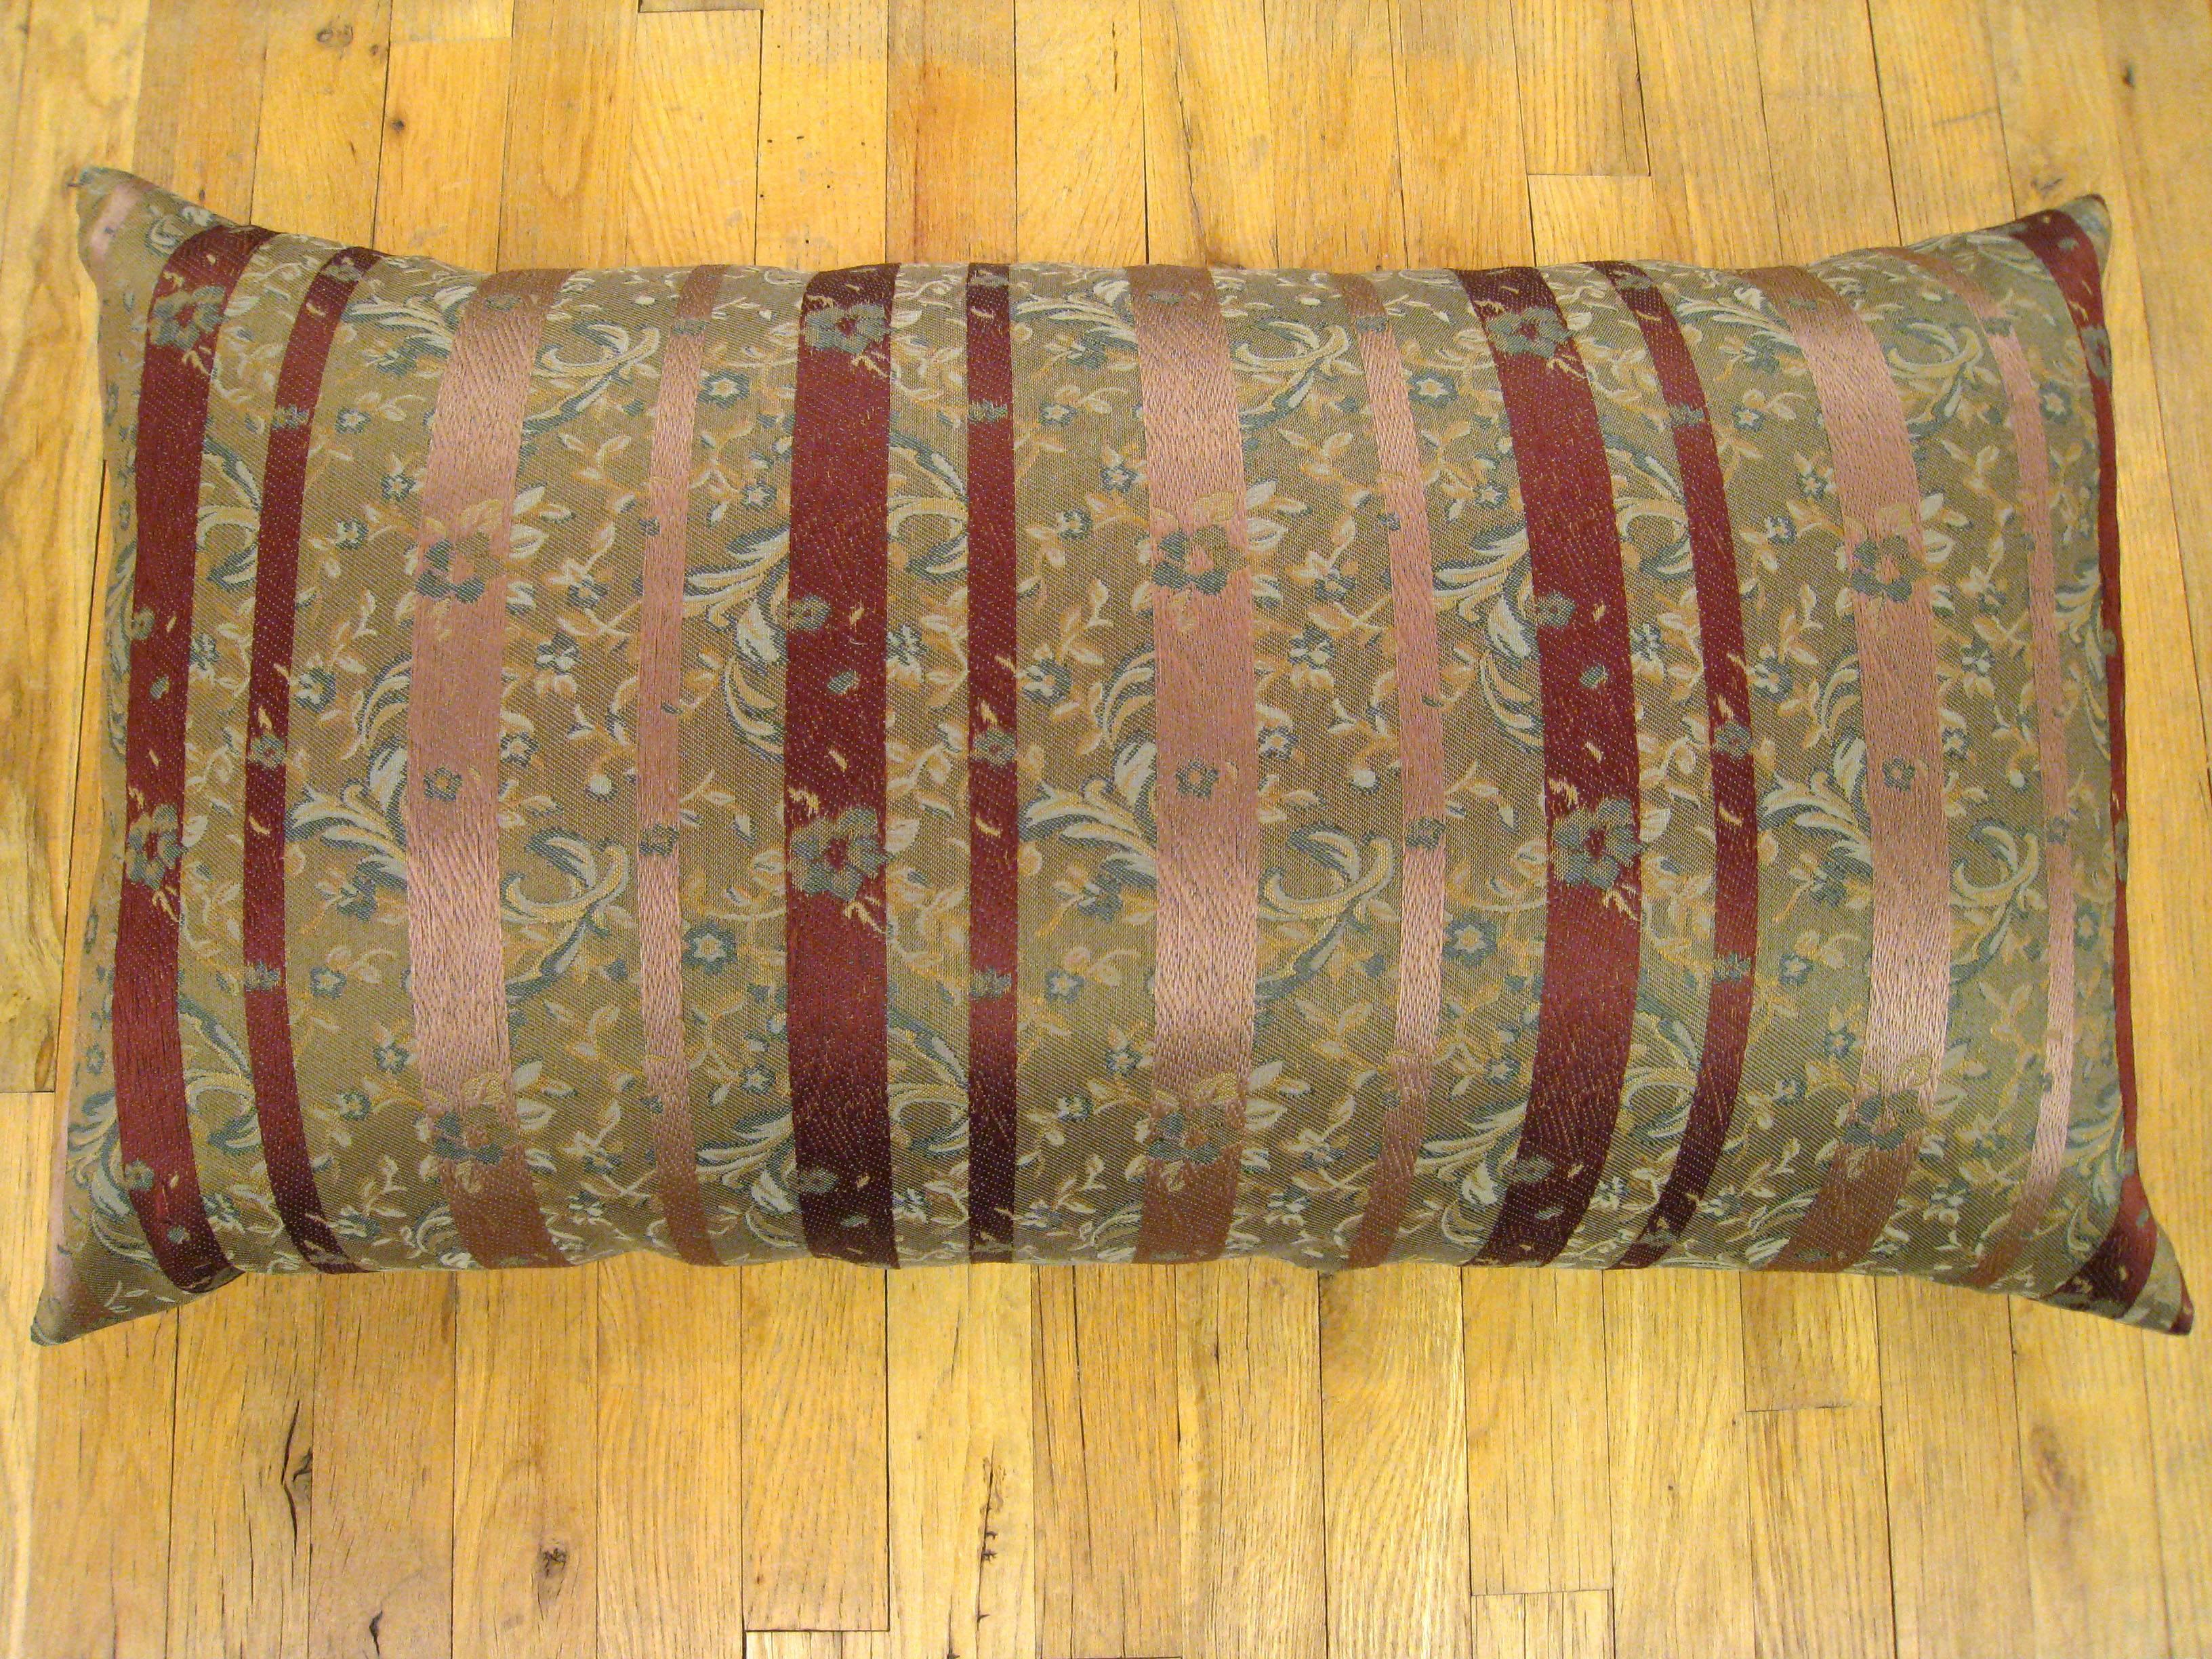 Pair of Large Decorative Satin Pillows w/ Vintage Striped Brocade on Both Sides In Excellent Condition For Sale In New York, NY